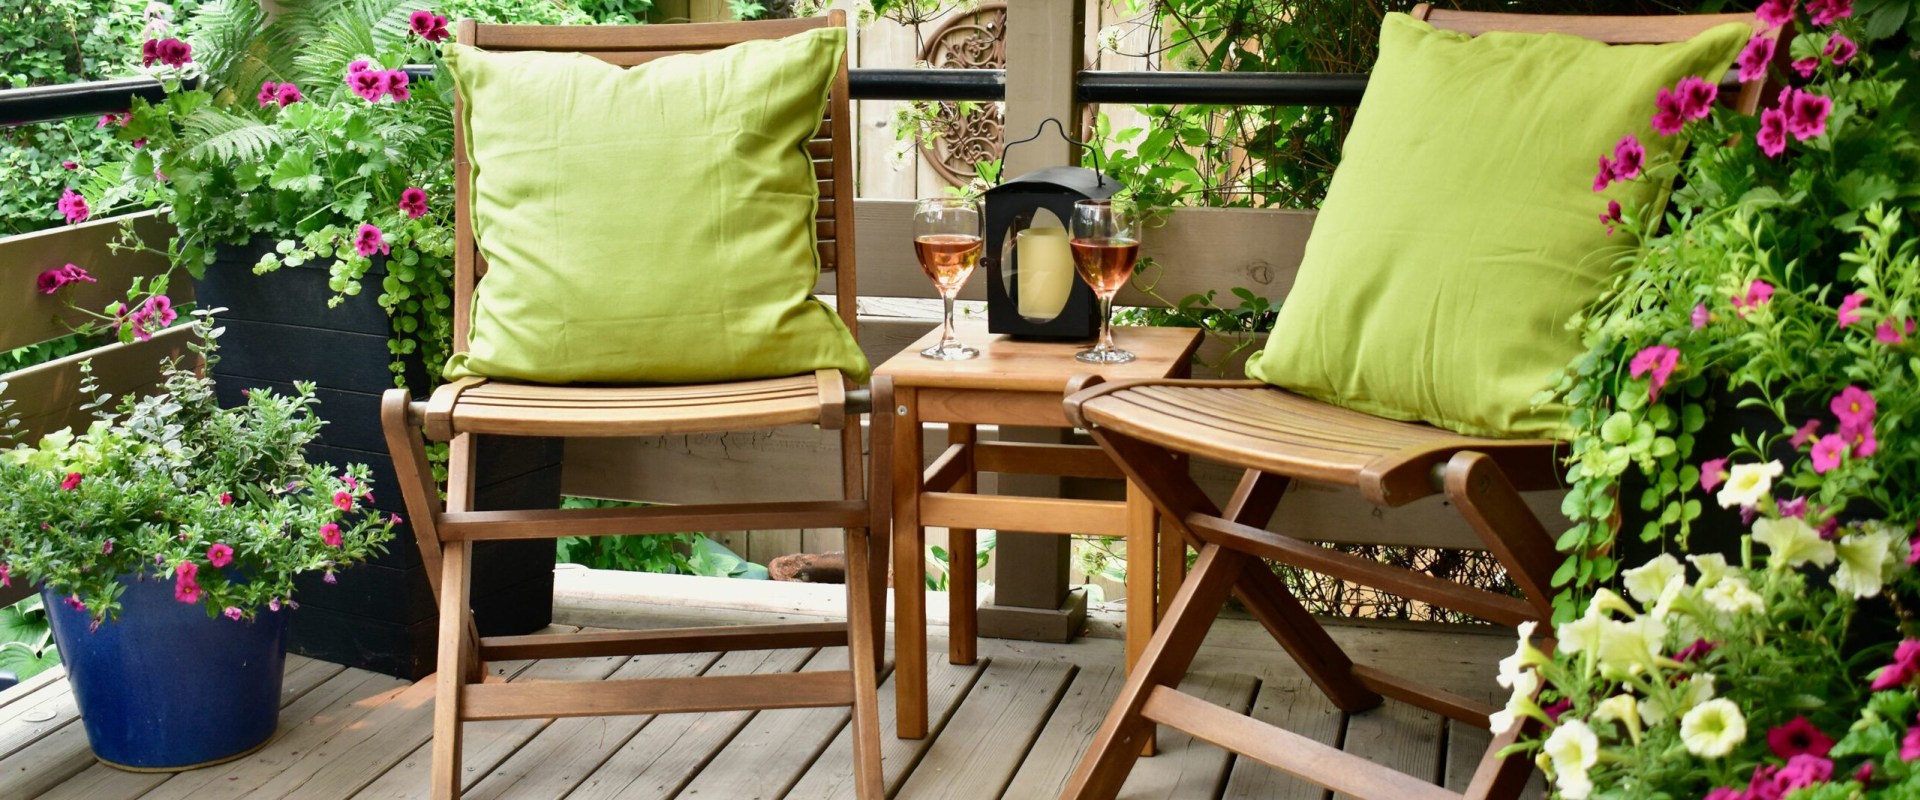 Regular Inspections and Upkeep: Keeping Your Outdoor Living Space in Tip-Top Shape